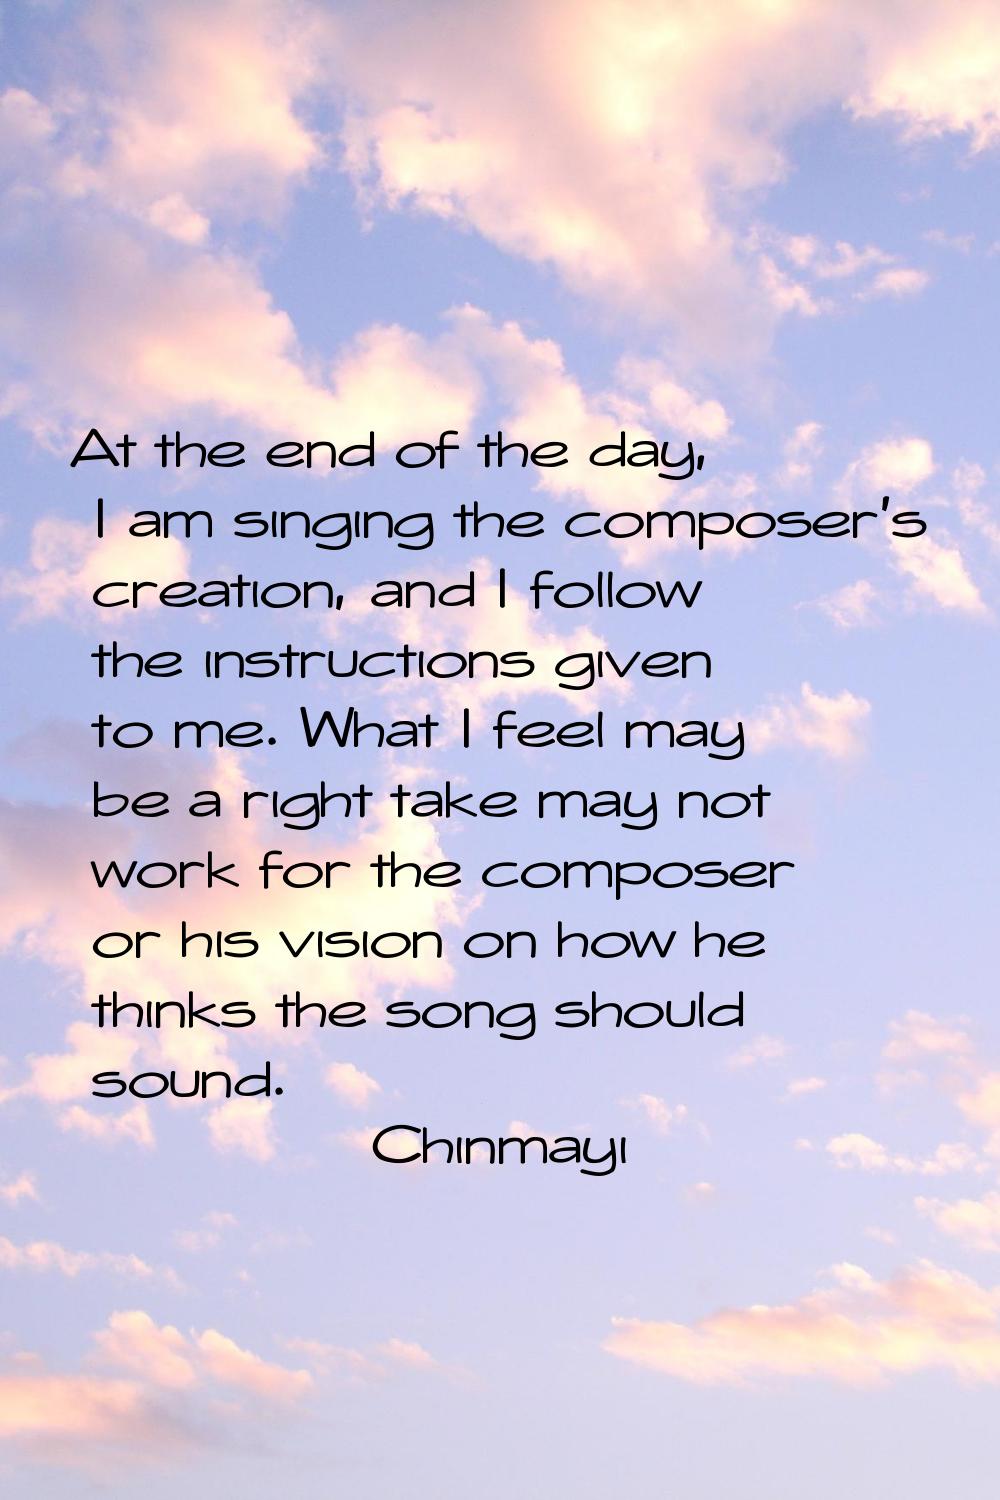 At the end of the day, I am singing the composer's creation, and I follow the instructions given to